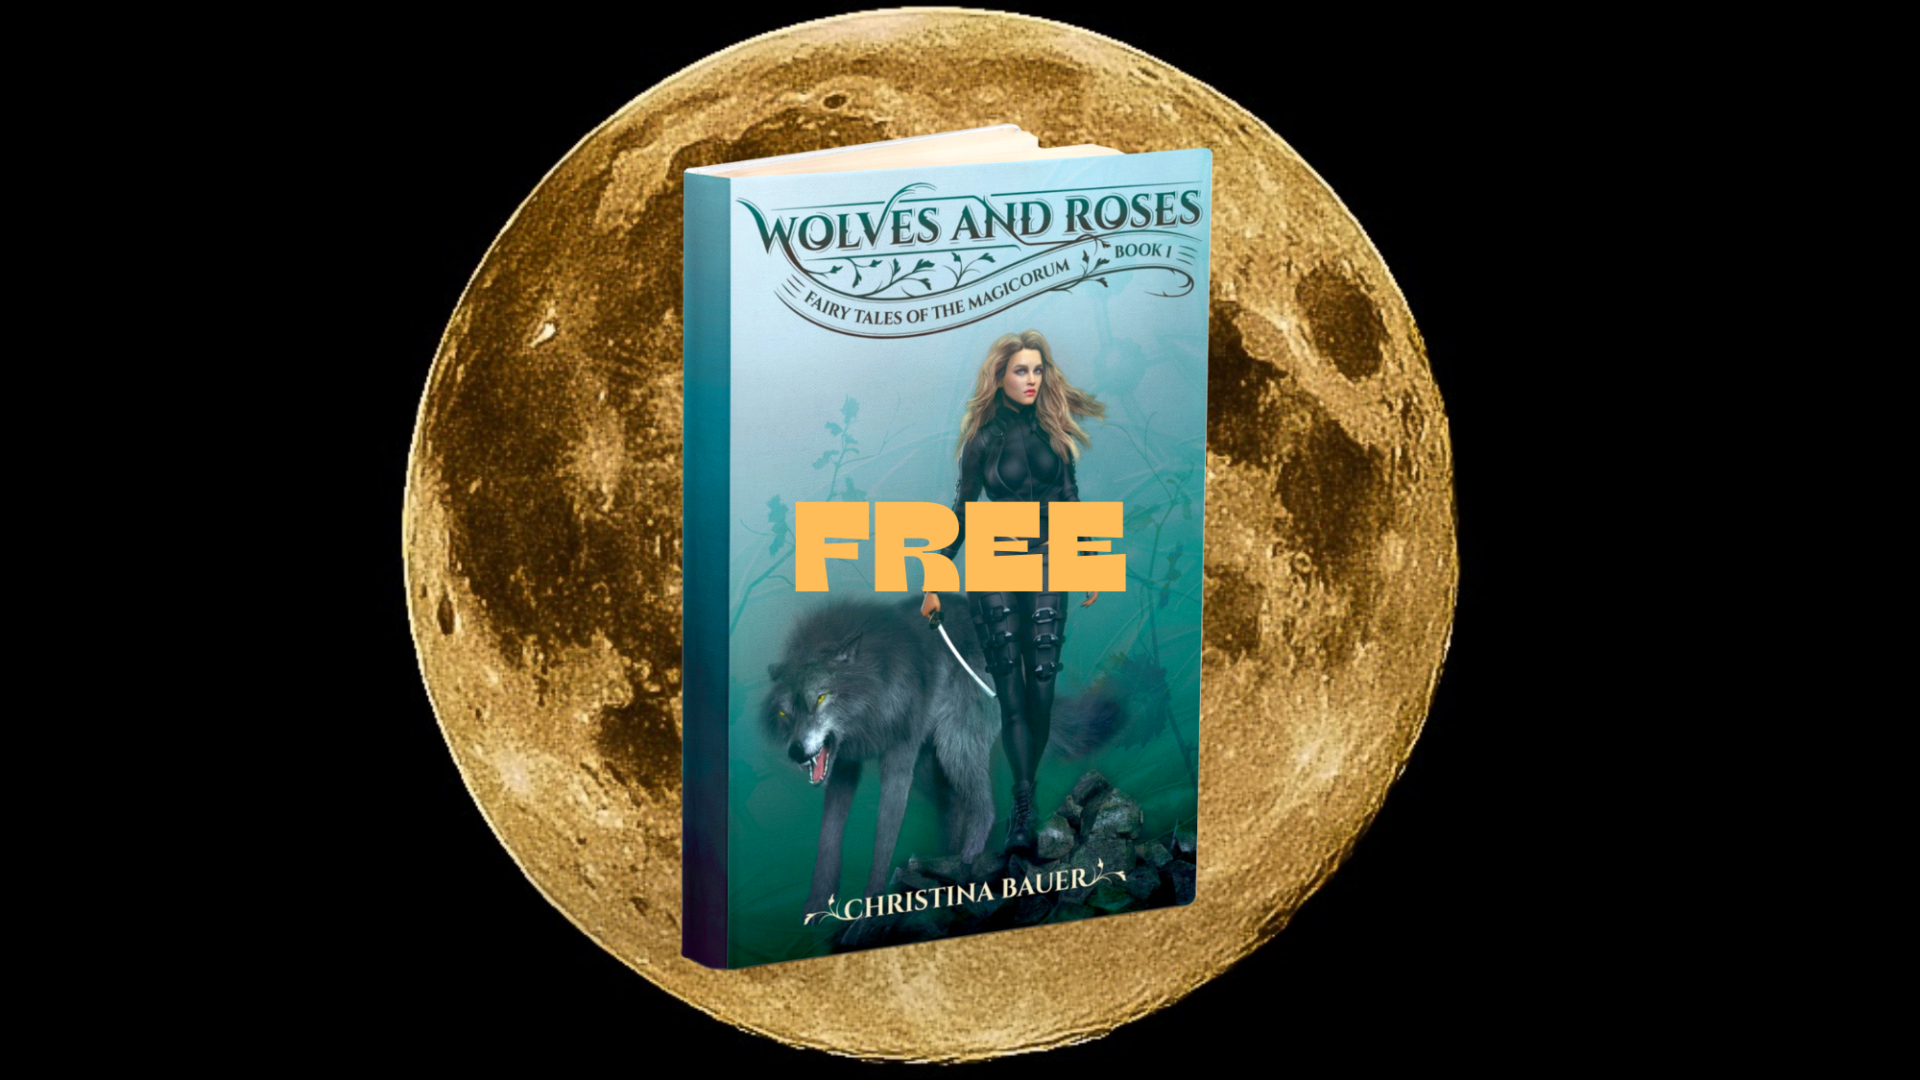 FREE for a limited time - WOLVES AND ROSES